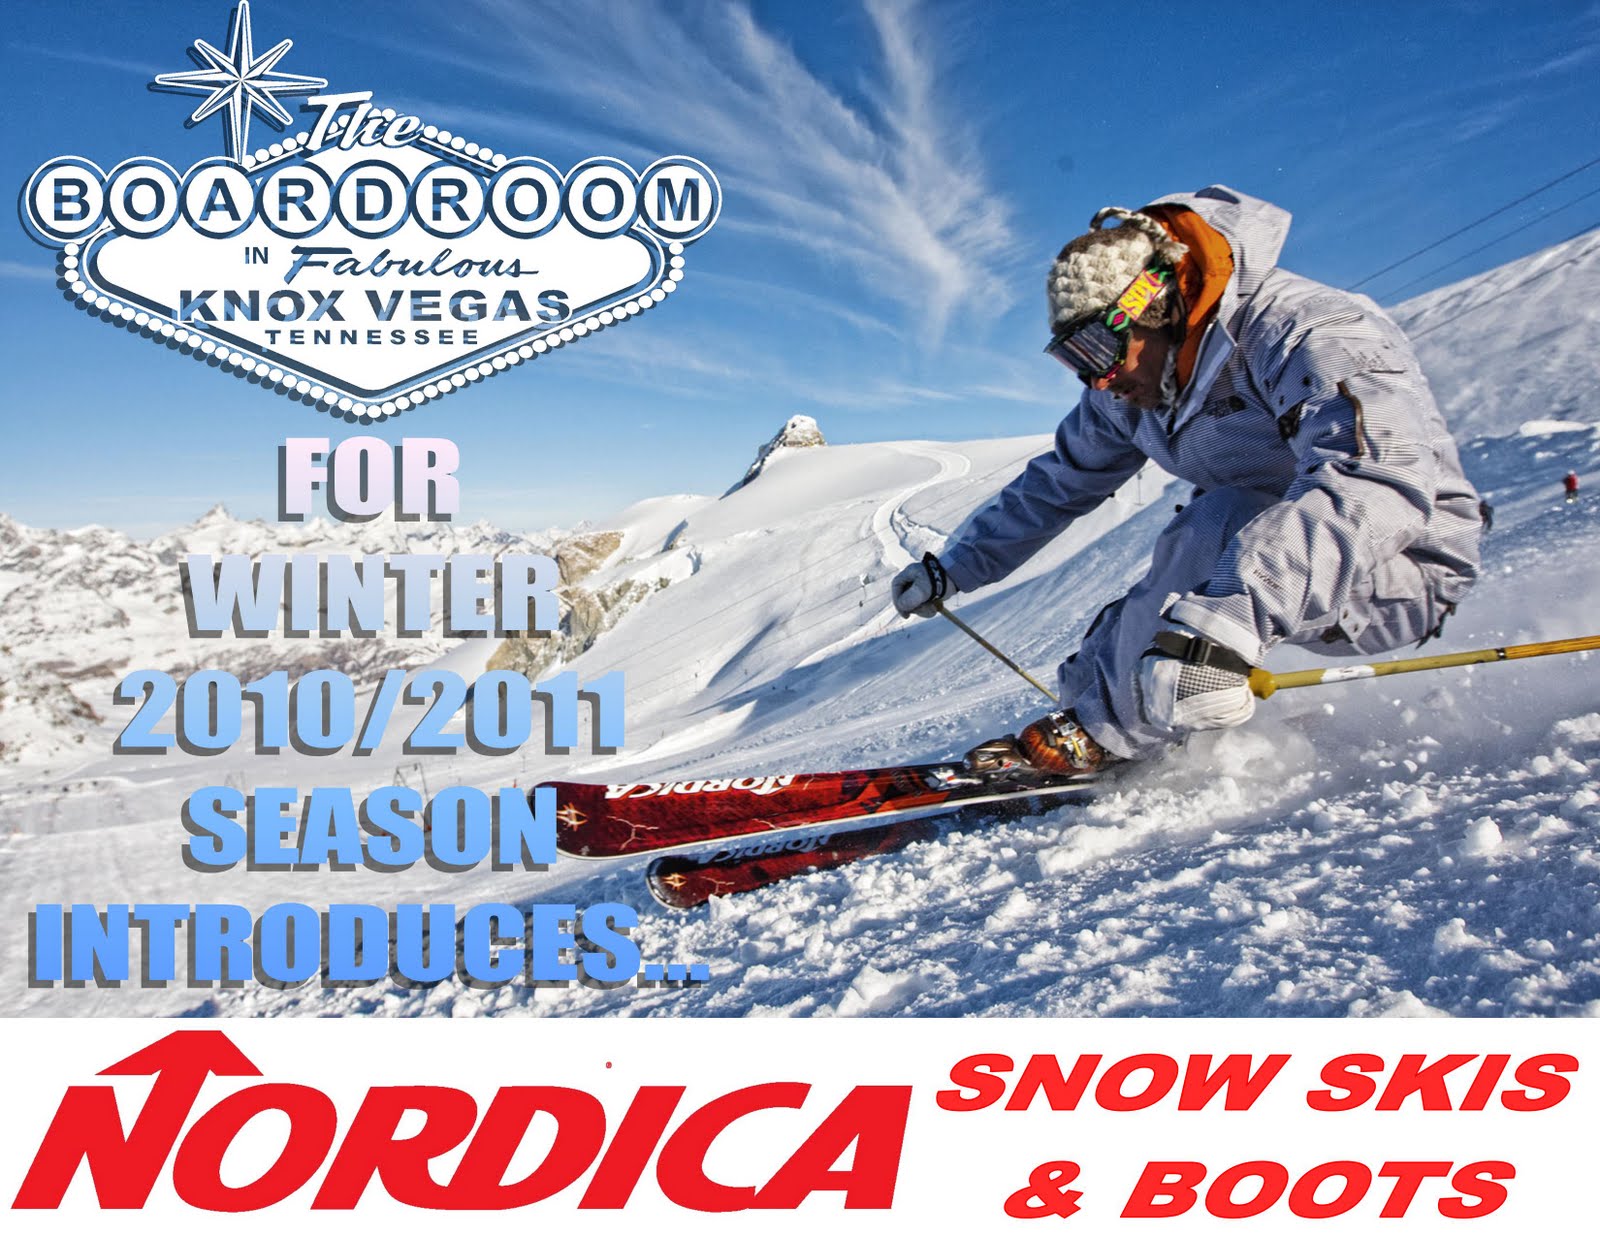 NORDICA SNOW SKIS AND BOOTS